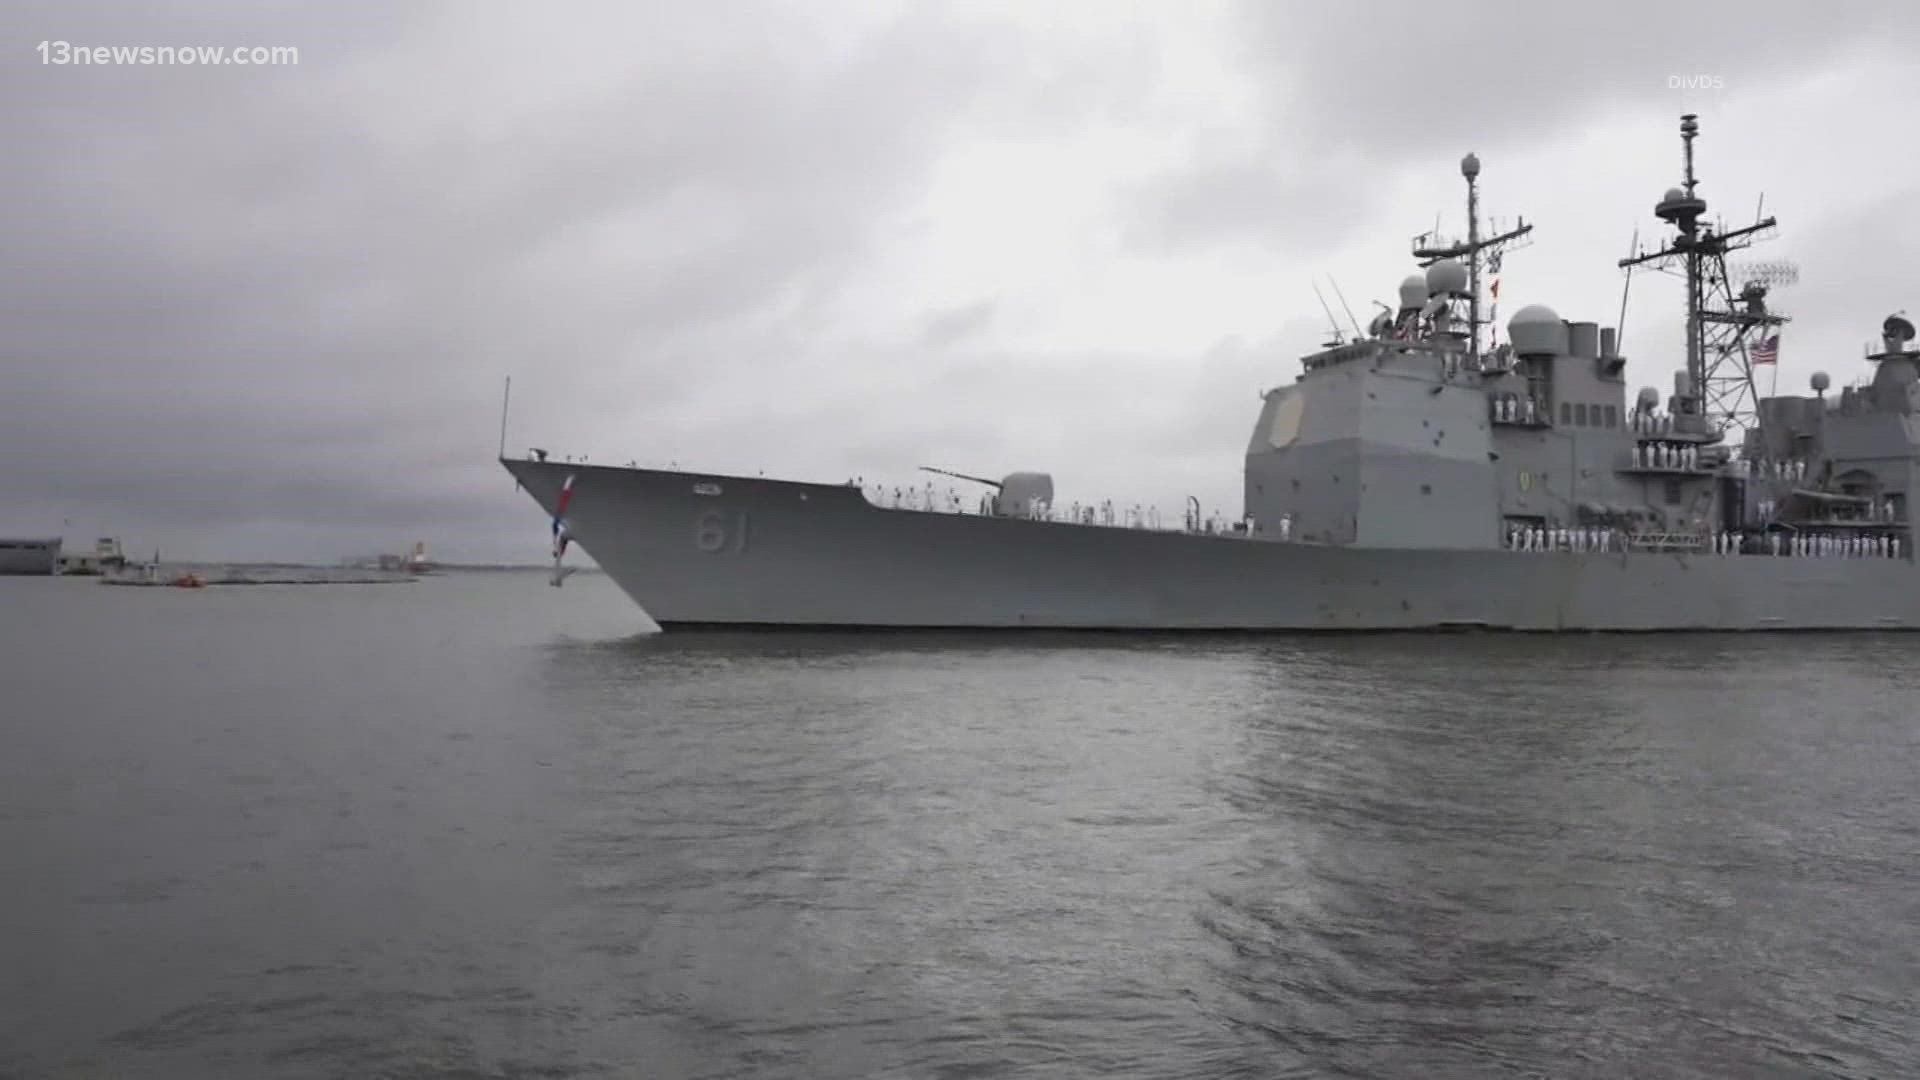 A decommissioning ceremony for the Ticonderoga-class guided-missile cruiser was held Friday, celebrating 32 years of service in the U.S. Navy.